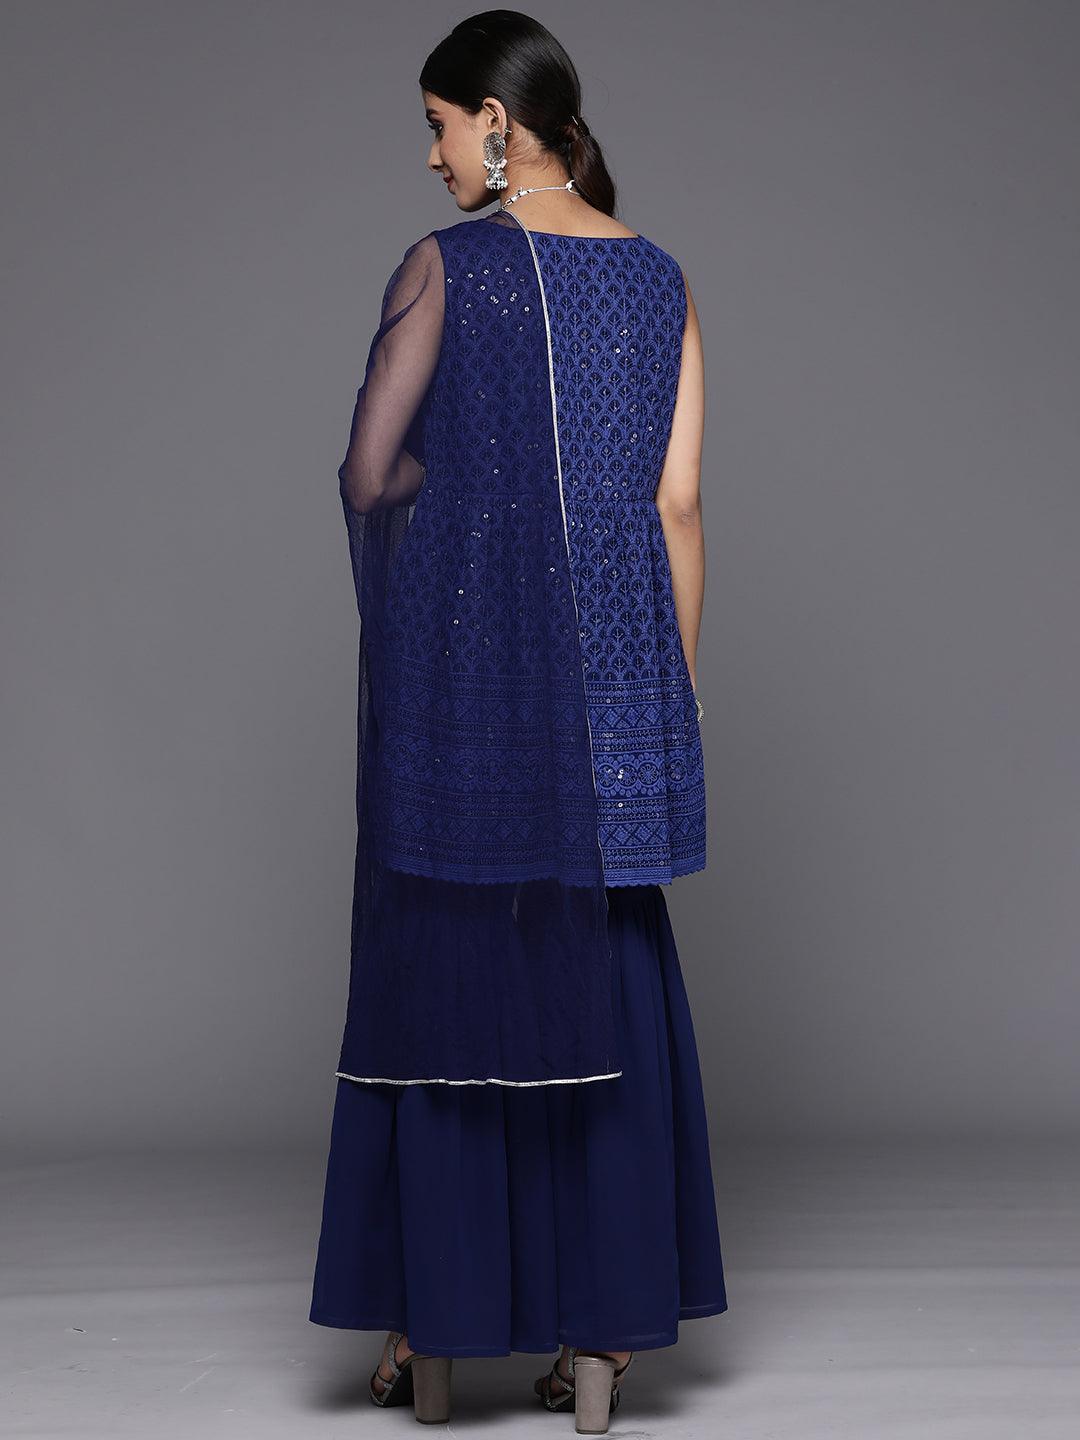 Navy Blue Embroidered Georgette A-Line Suit Set With Sharara - Libas